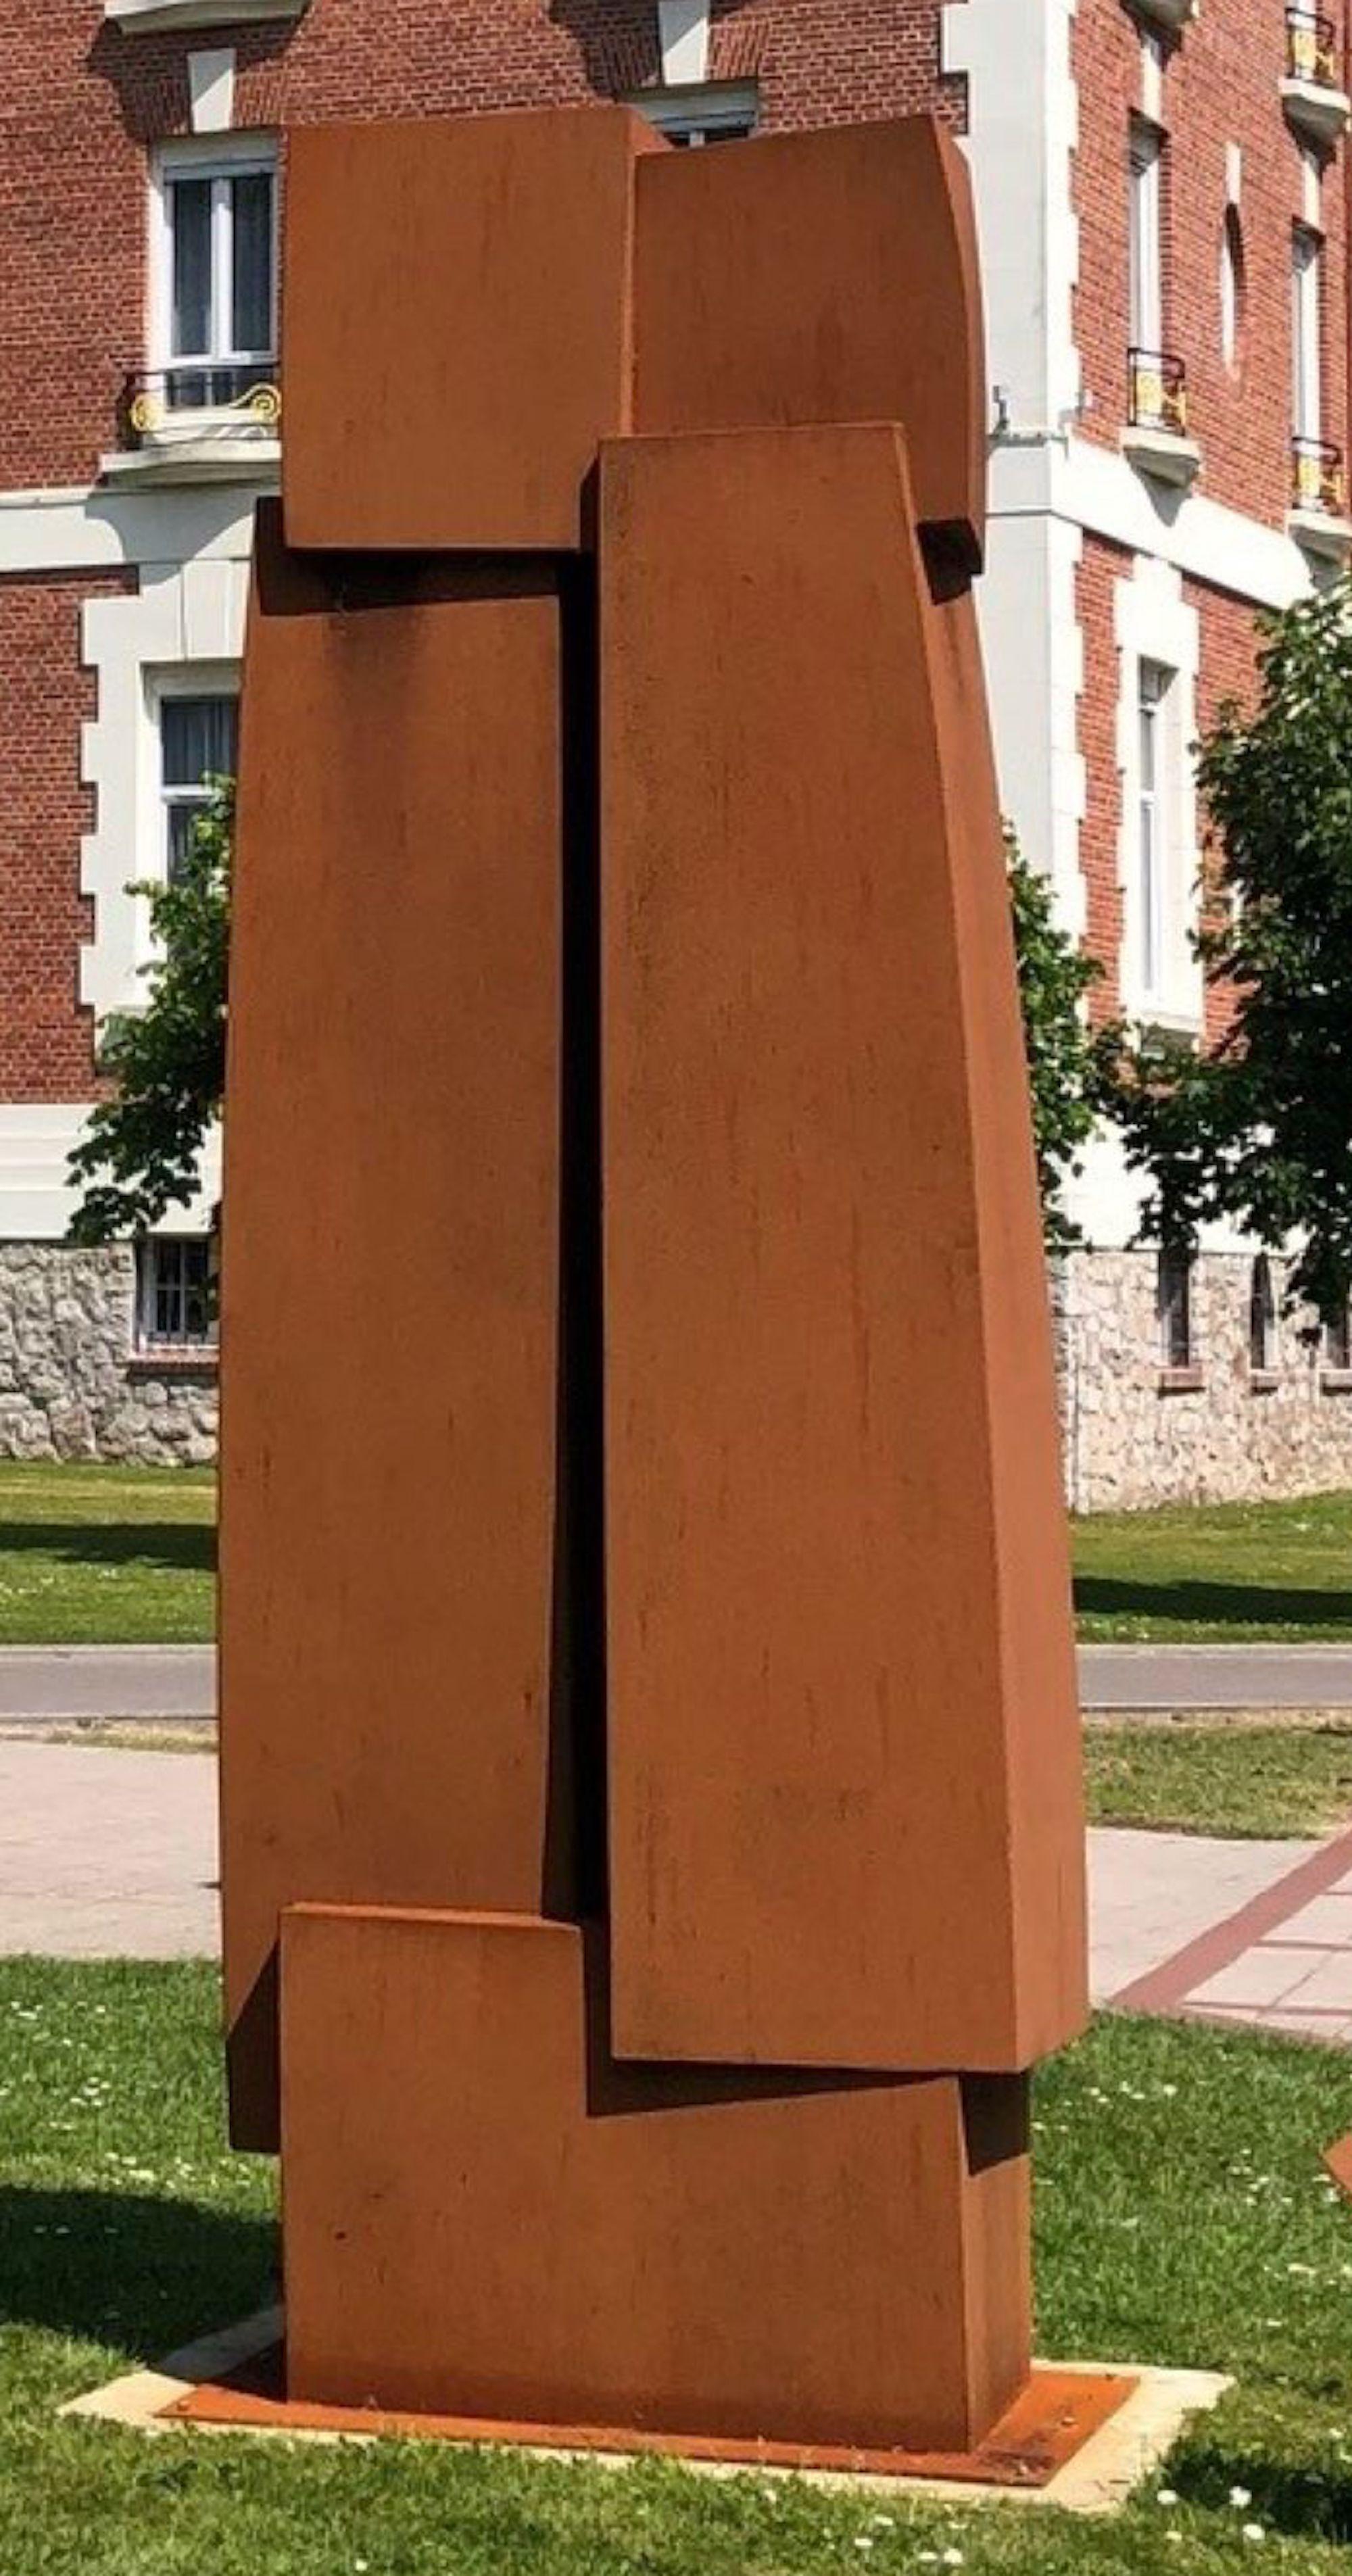 Unity I by Delphine Brabant - Abstract geometric sculpture, corten steel, brown For Sale 4